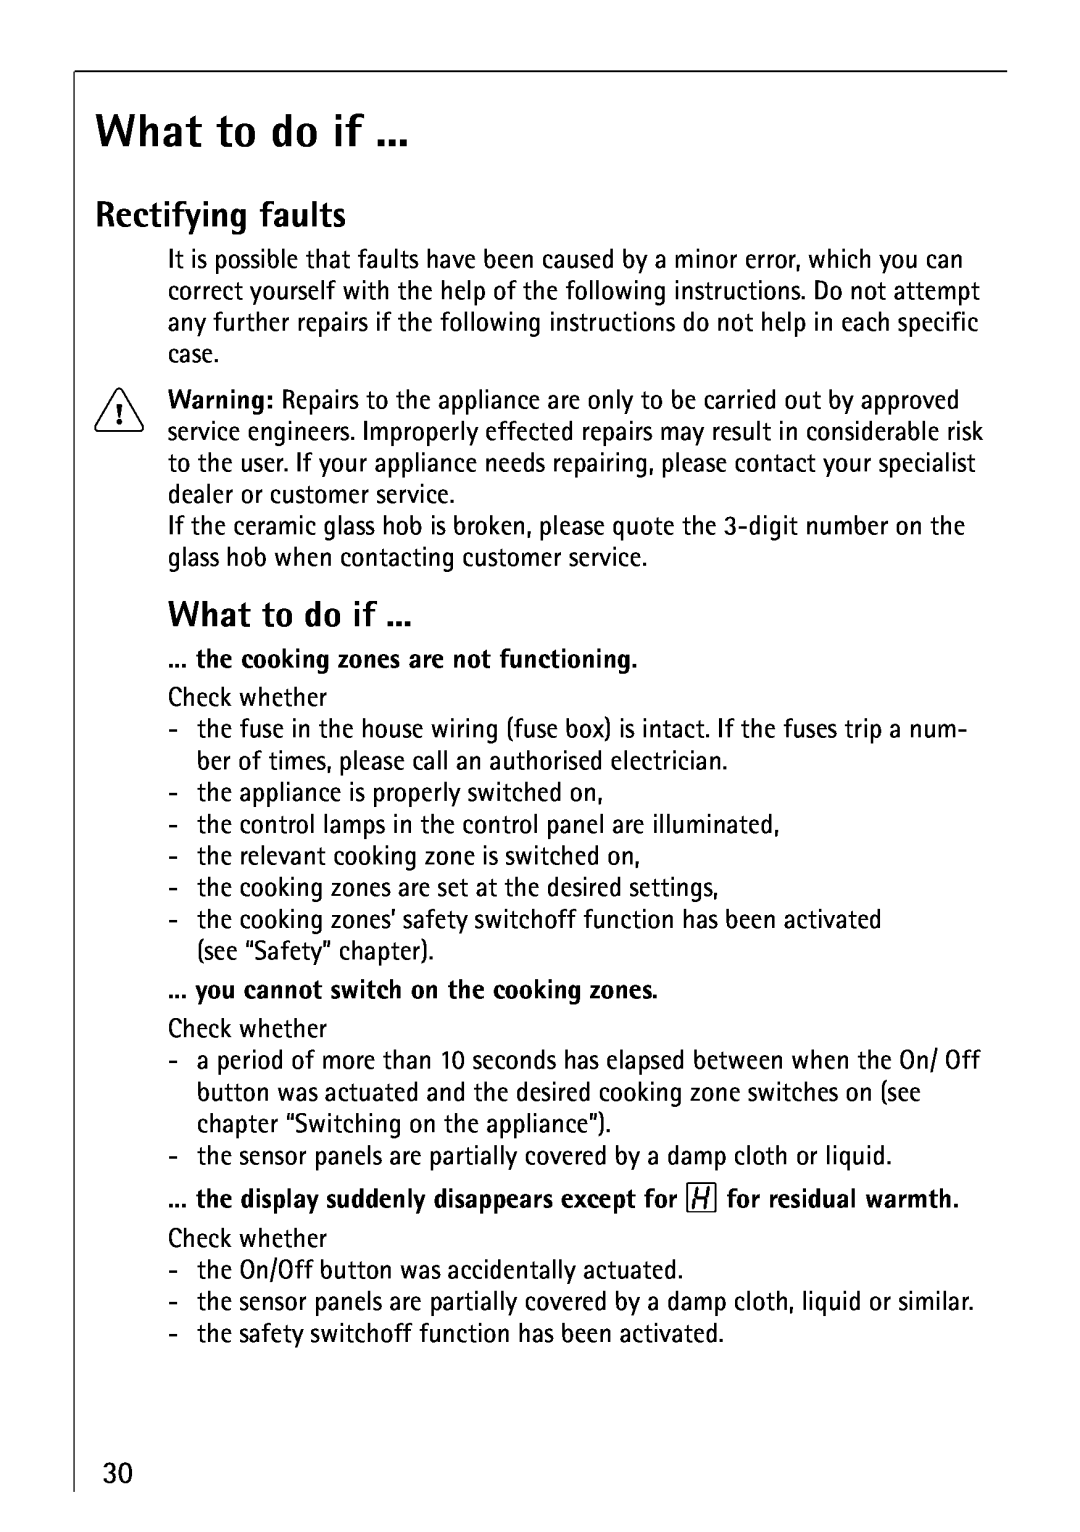 Electrolux 66300KF-an installation instructions What to do if, Rectifying faults 